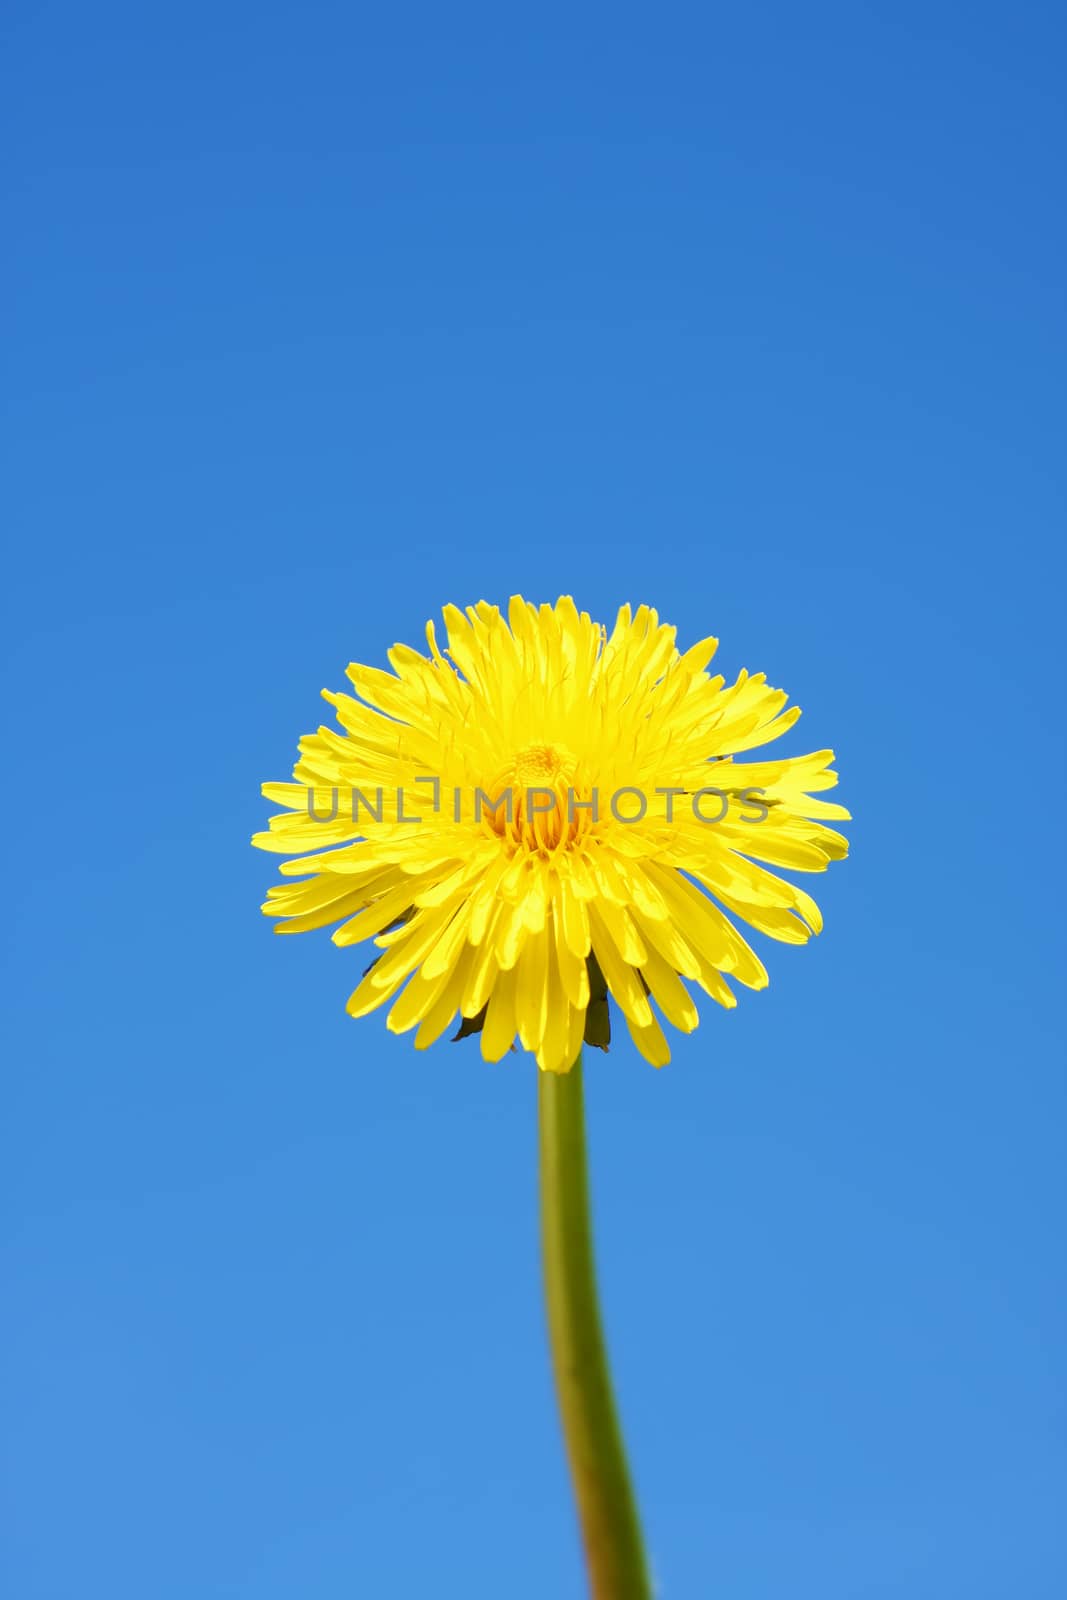 An image of a sweet dandelion in the blue sky background